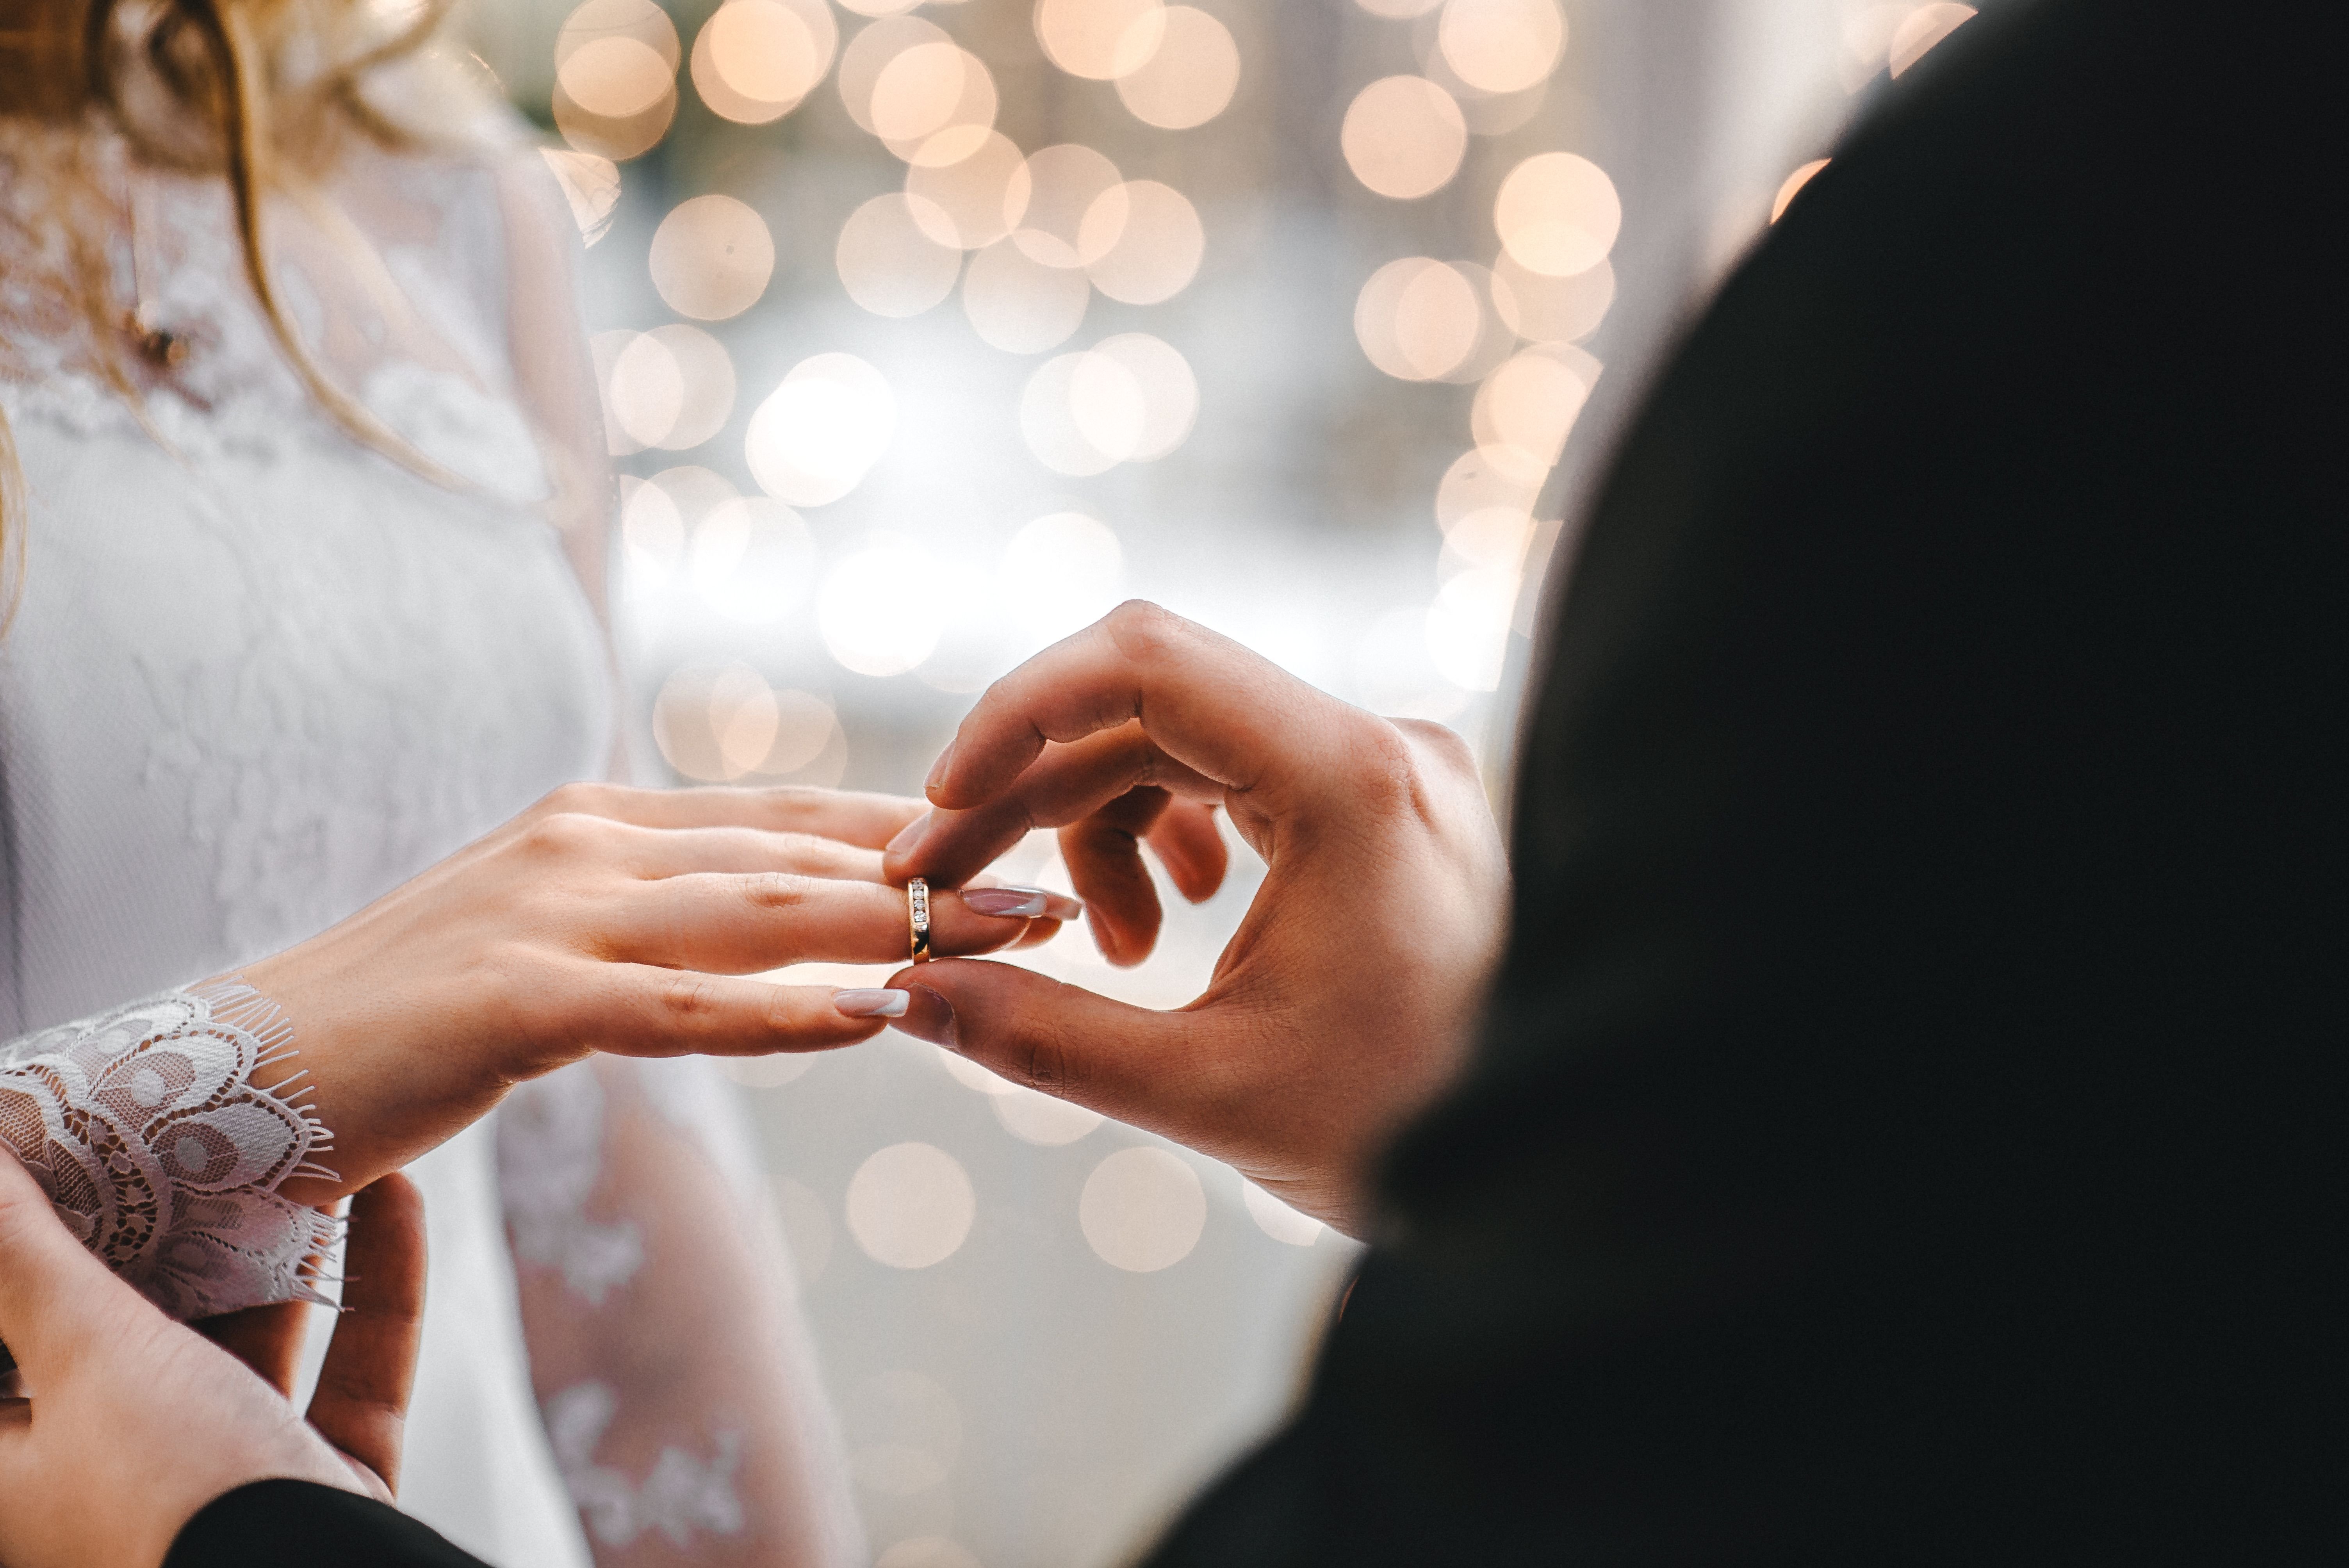 A groom puts a wedding ring on his bride's finger. | Source: Shutterstock